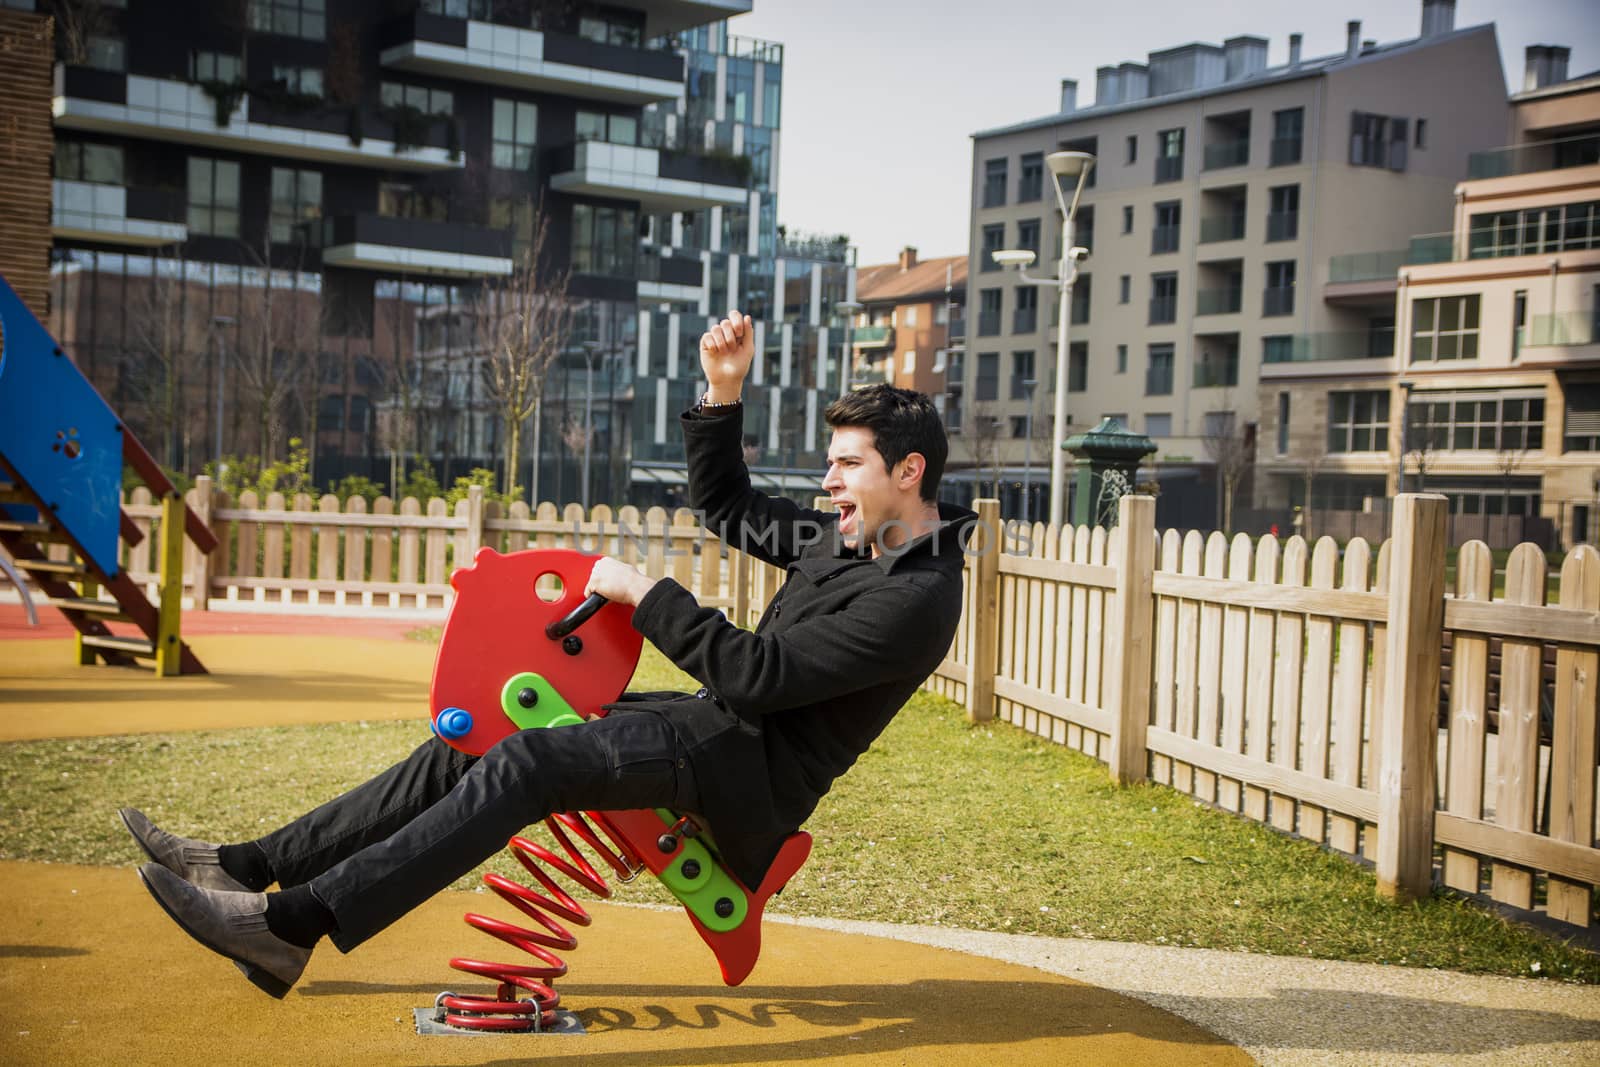 Young man reliving his childhood plying in a children's playground riding on a colorful red spring seat with a happy smile in an urban park